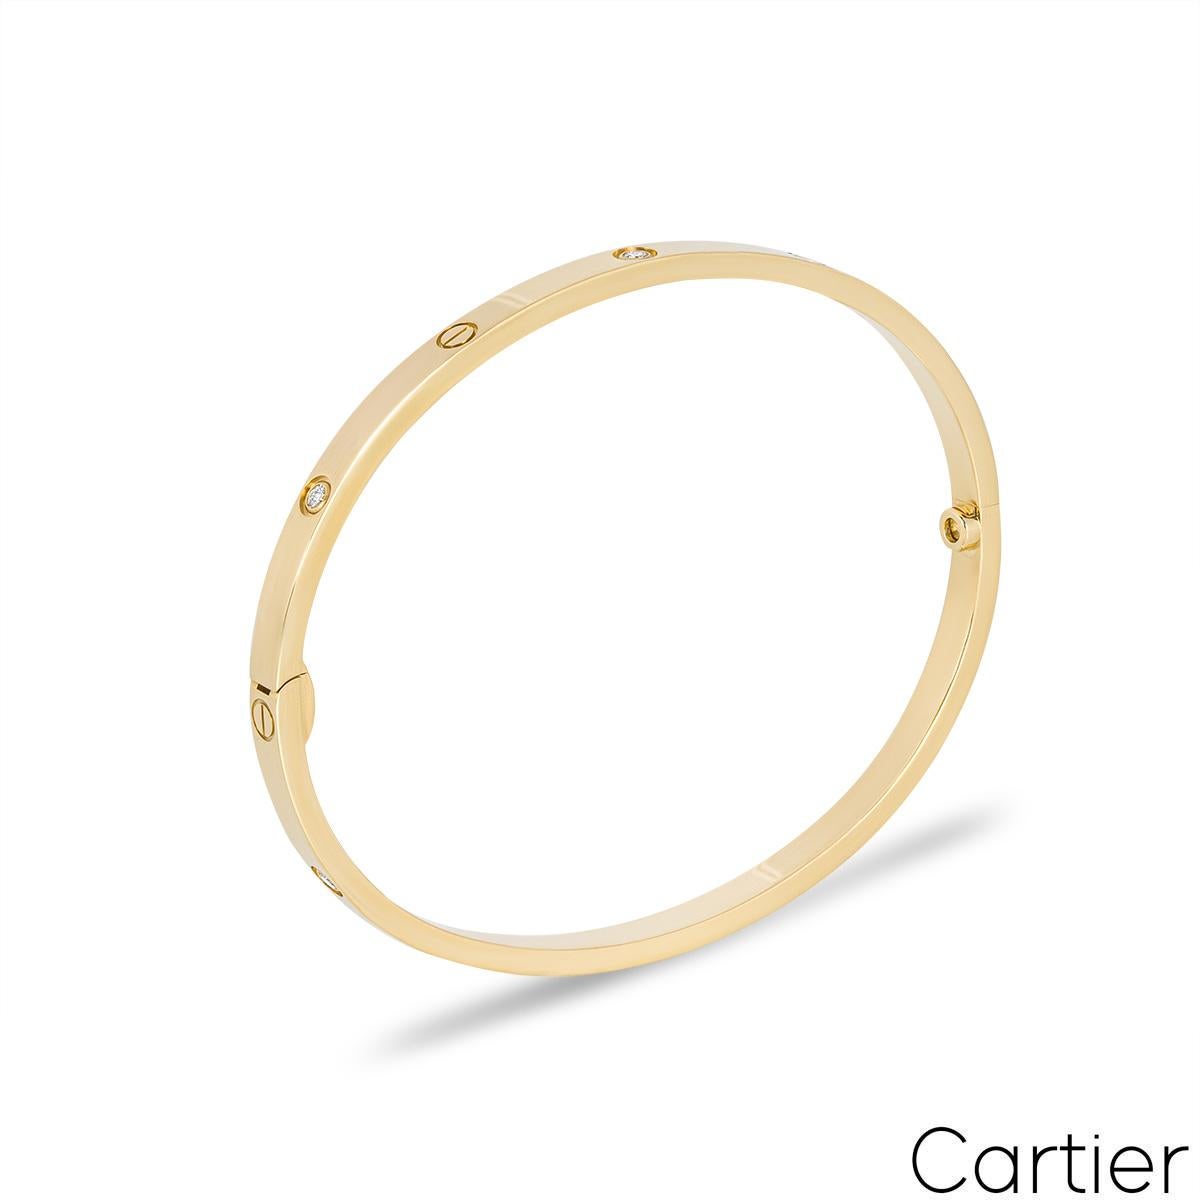 A Cartier 18k Yellow Gold Half Diamond SM Bracelet, from the Love collection. This slimmer version of the classic Love bracelet features Cartier's iconic screw motif design alternating with 6 round brilliant cut diamonds (~0.15ct) and a single screw